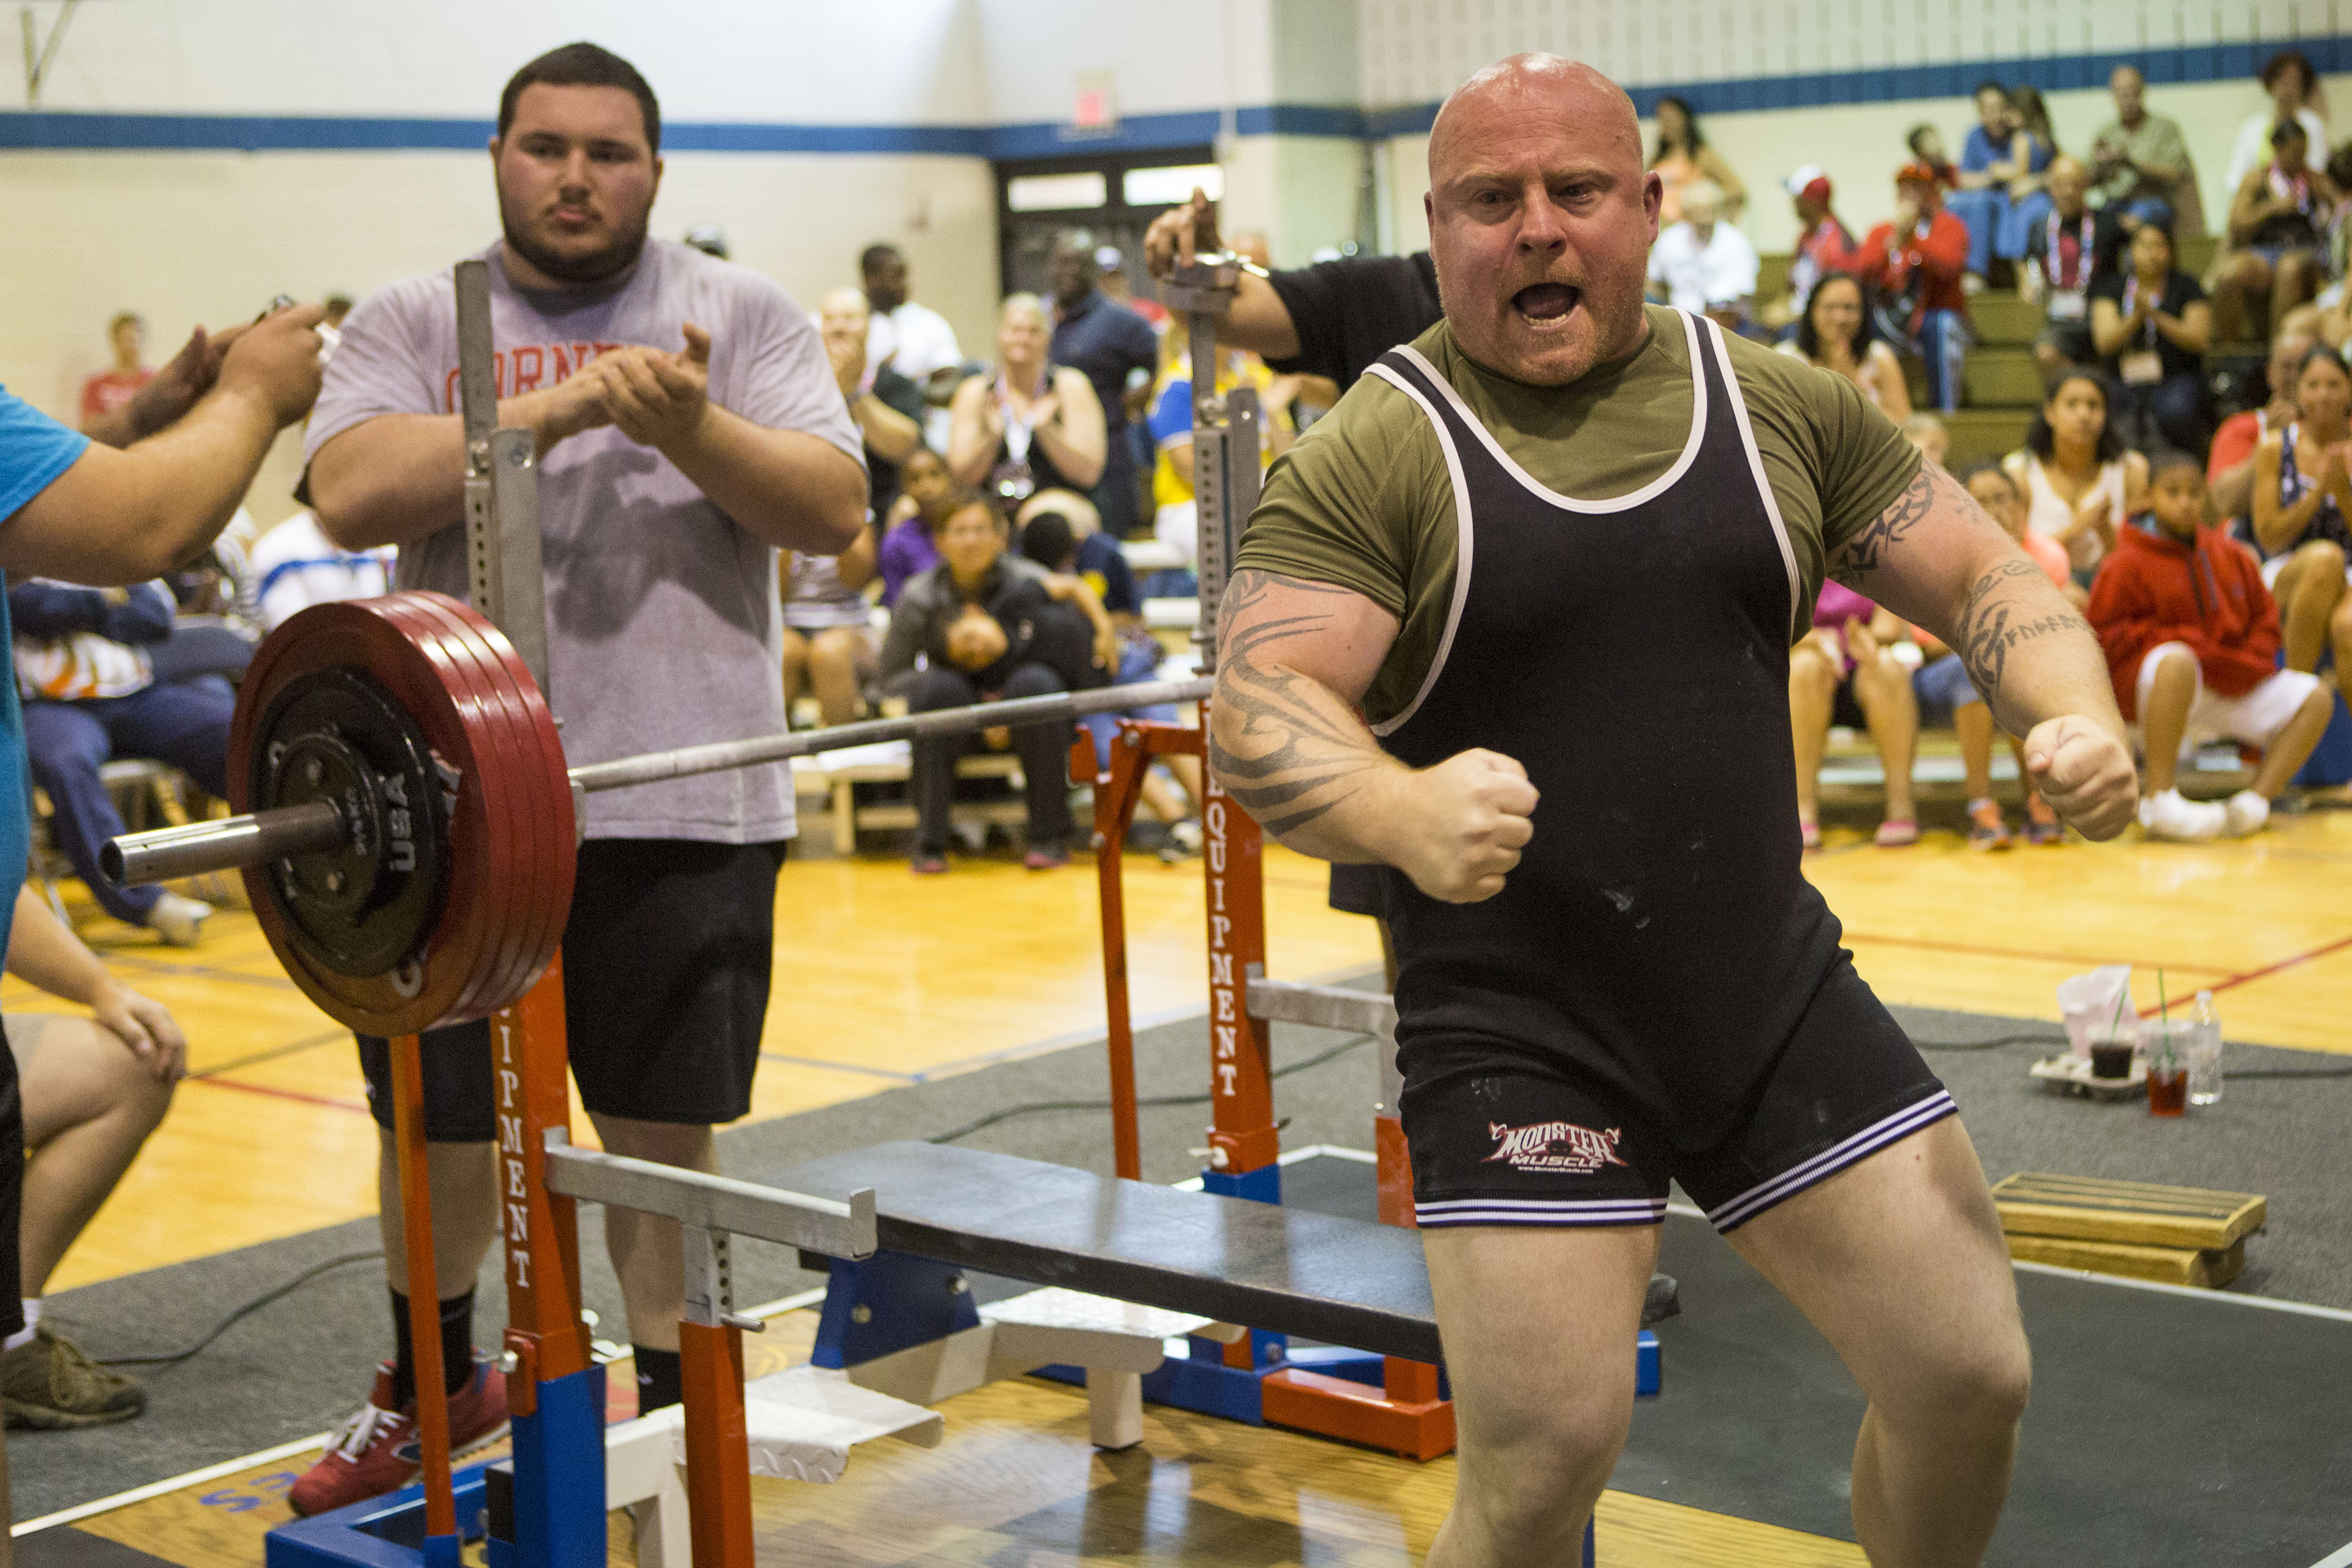 An exuberant Matt Phelps sets a 2015 World Police & Fire Games bench press world record. The Bonners Ferry, Idaho, Border Patrol agent reached his goal and his dream, lifting a remarkable 551 pounds. Photo by James Tourtellotte 